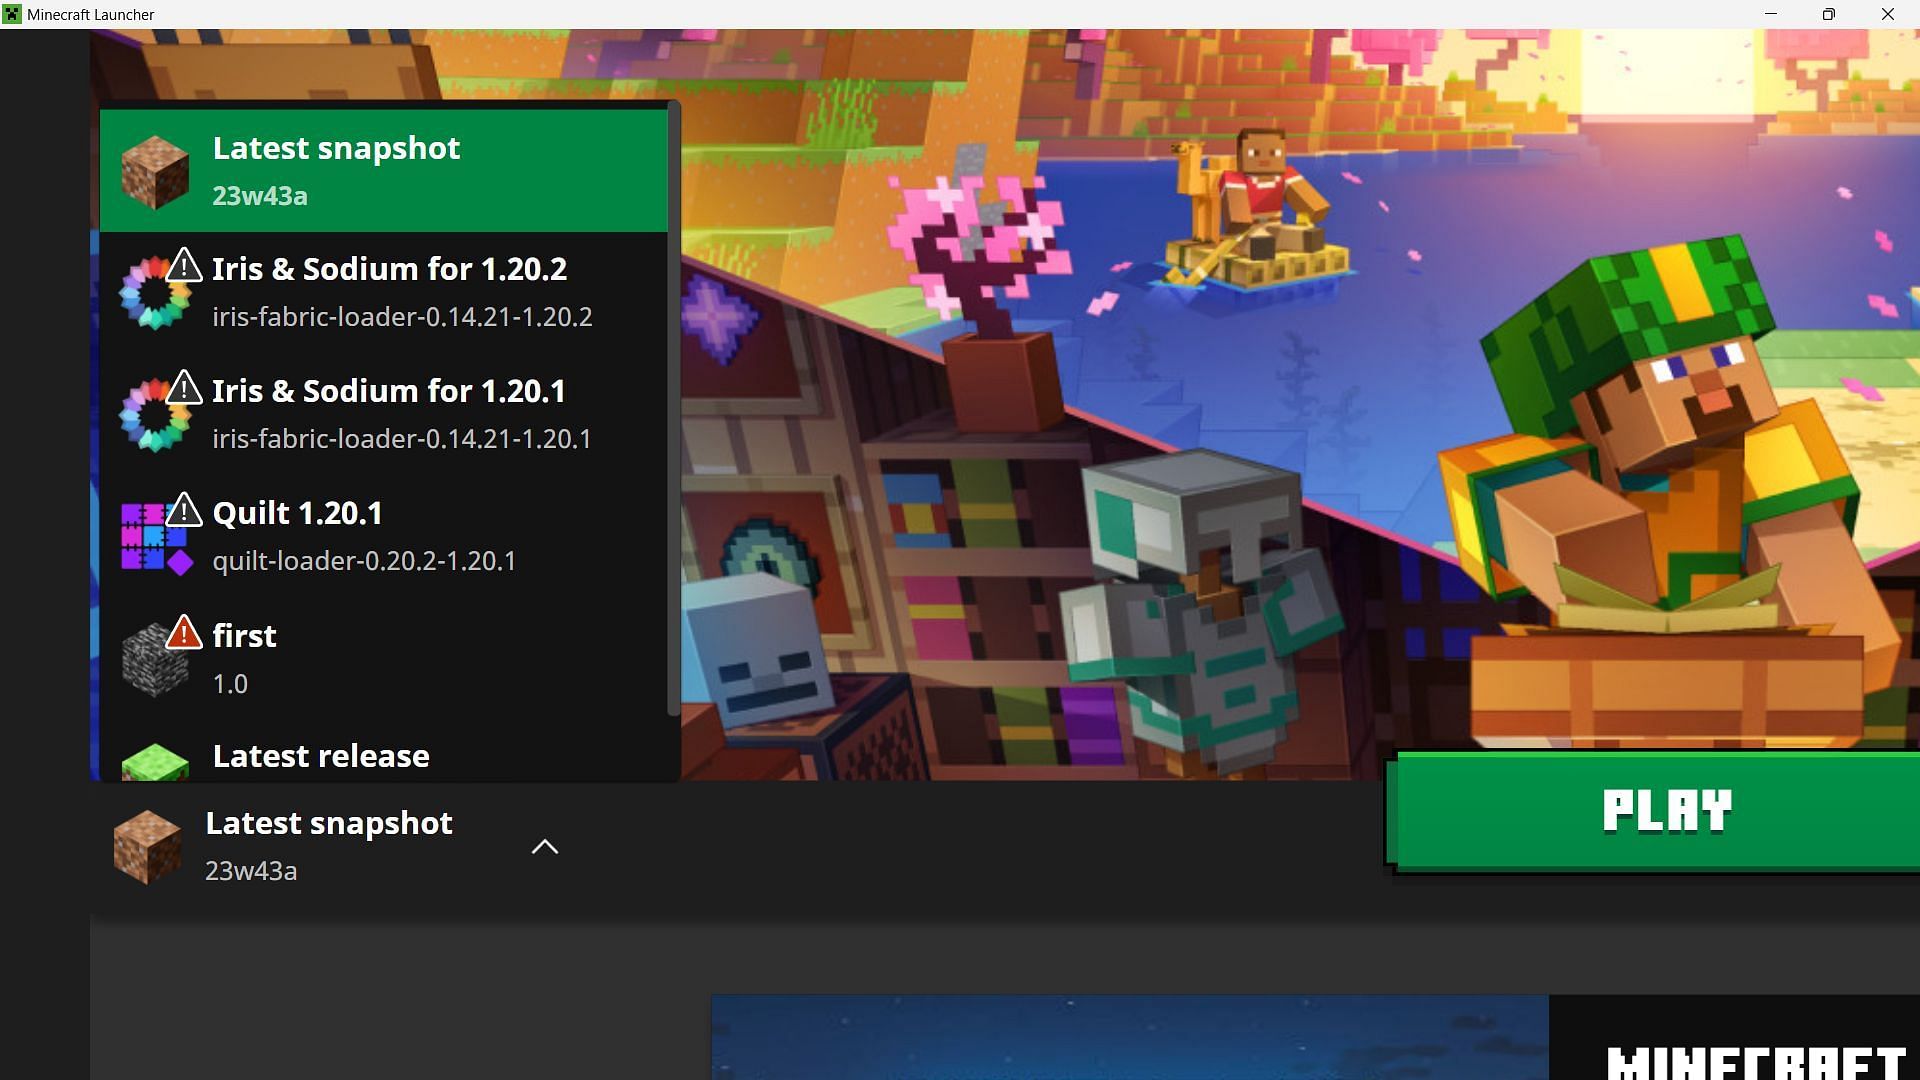 You need to download the latest Minecraft snapshot from the game launcher (Image via Mojang)